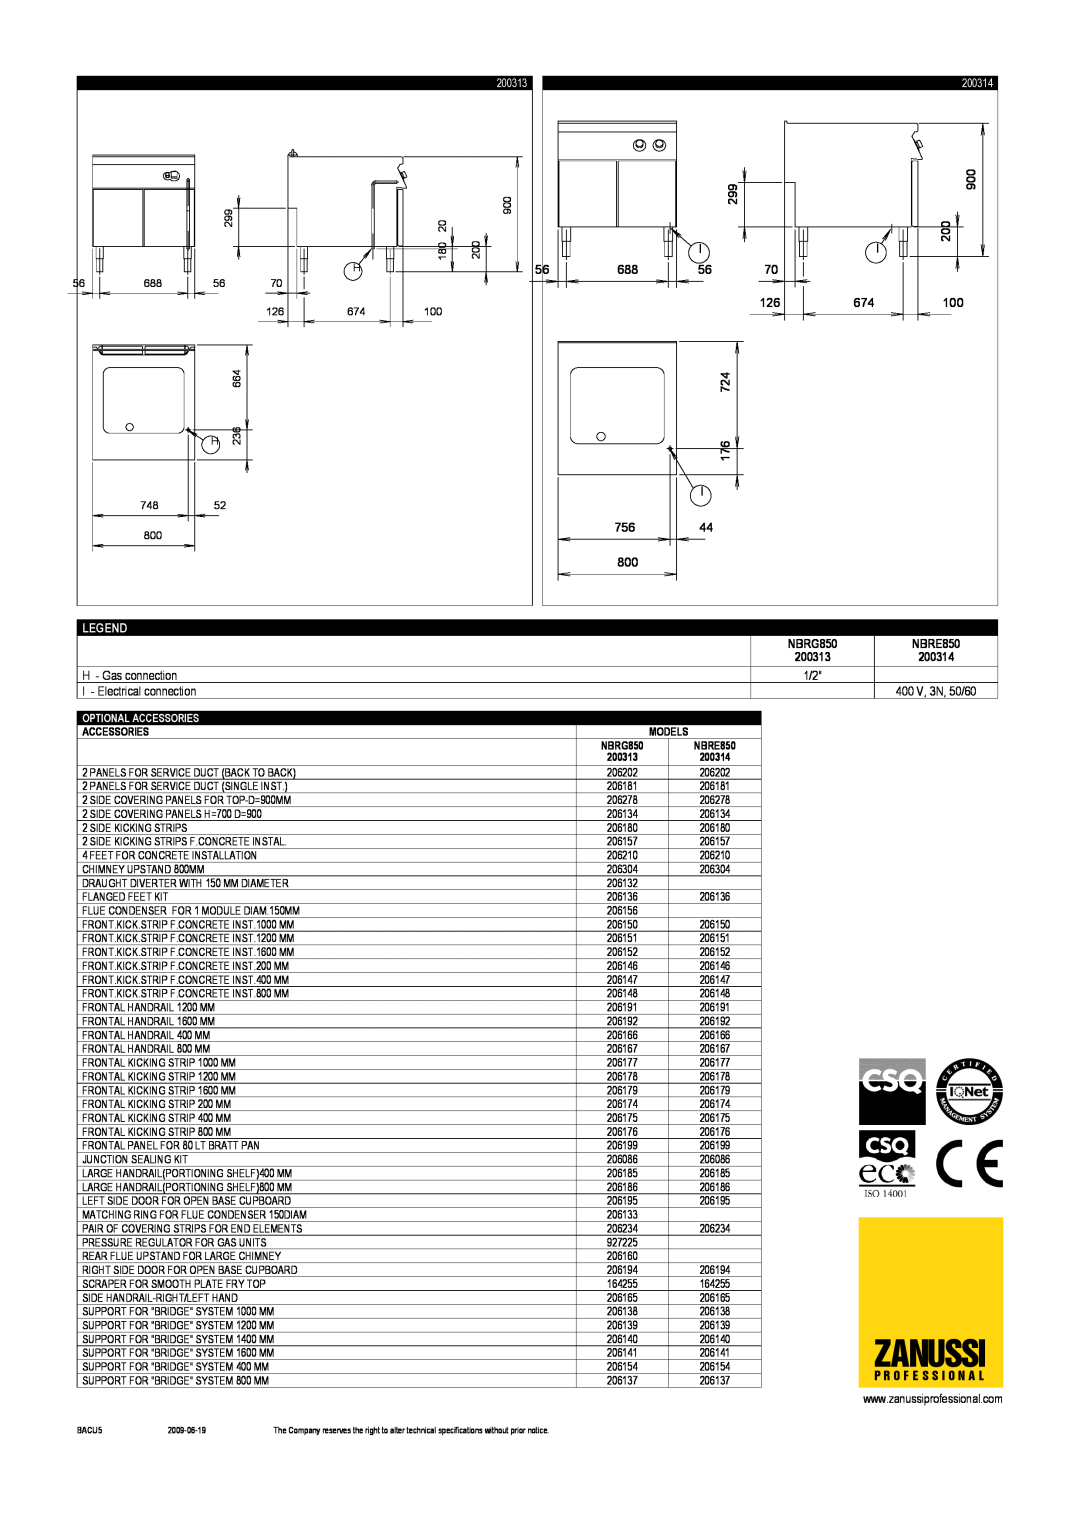 Zanussi 200314 dimensions Zanussi, Gas connection, Electrical connection, 400 V, 3N, 50/60, NBRG850, NBRE850, 200313 